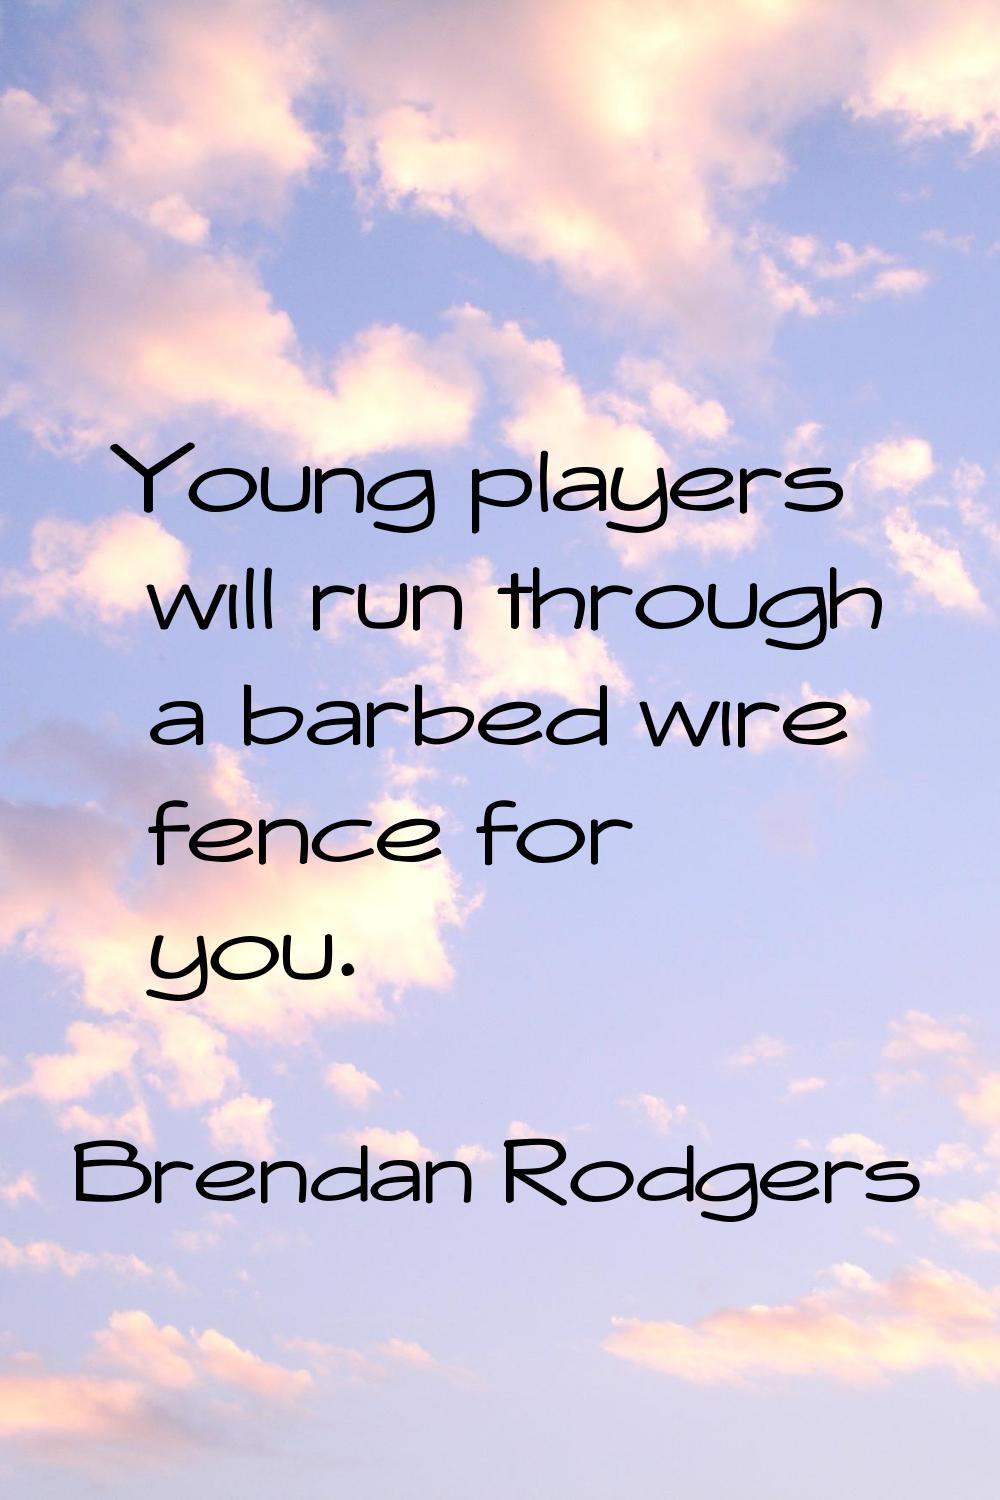 Young players will run through a barbed wire fence for you.